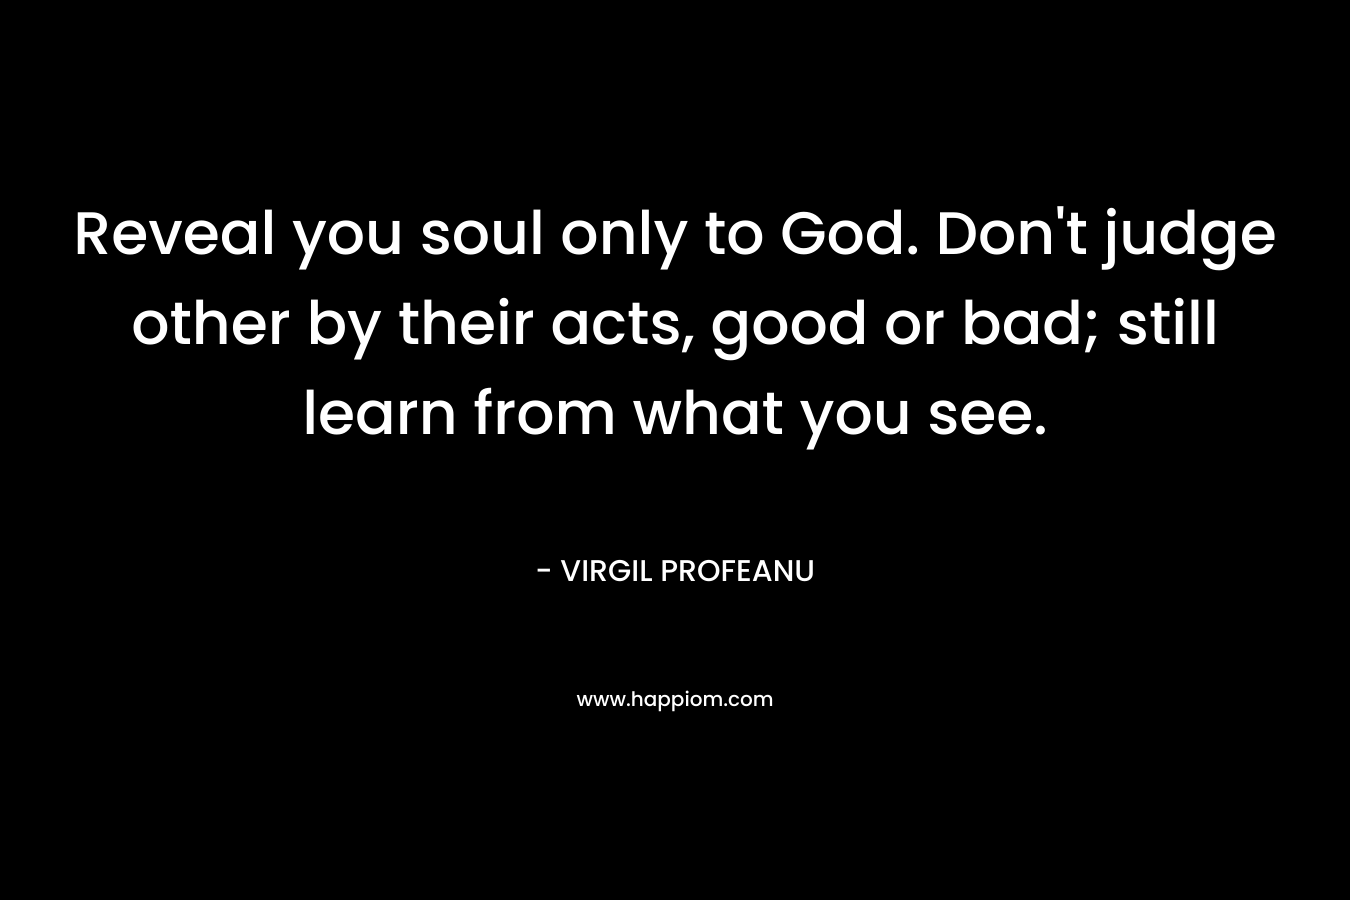 Reveal you soul only to God. Don't judge other by their acts, good or bad; still learn from what you see.